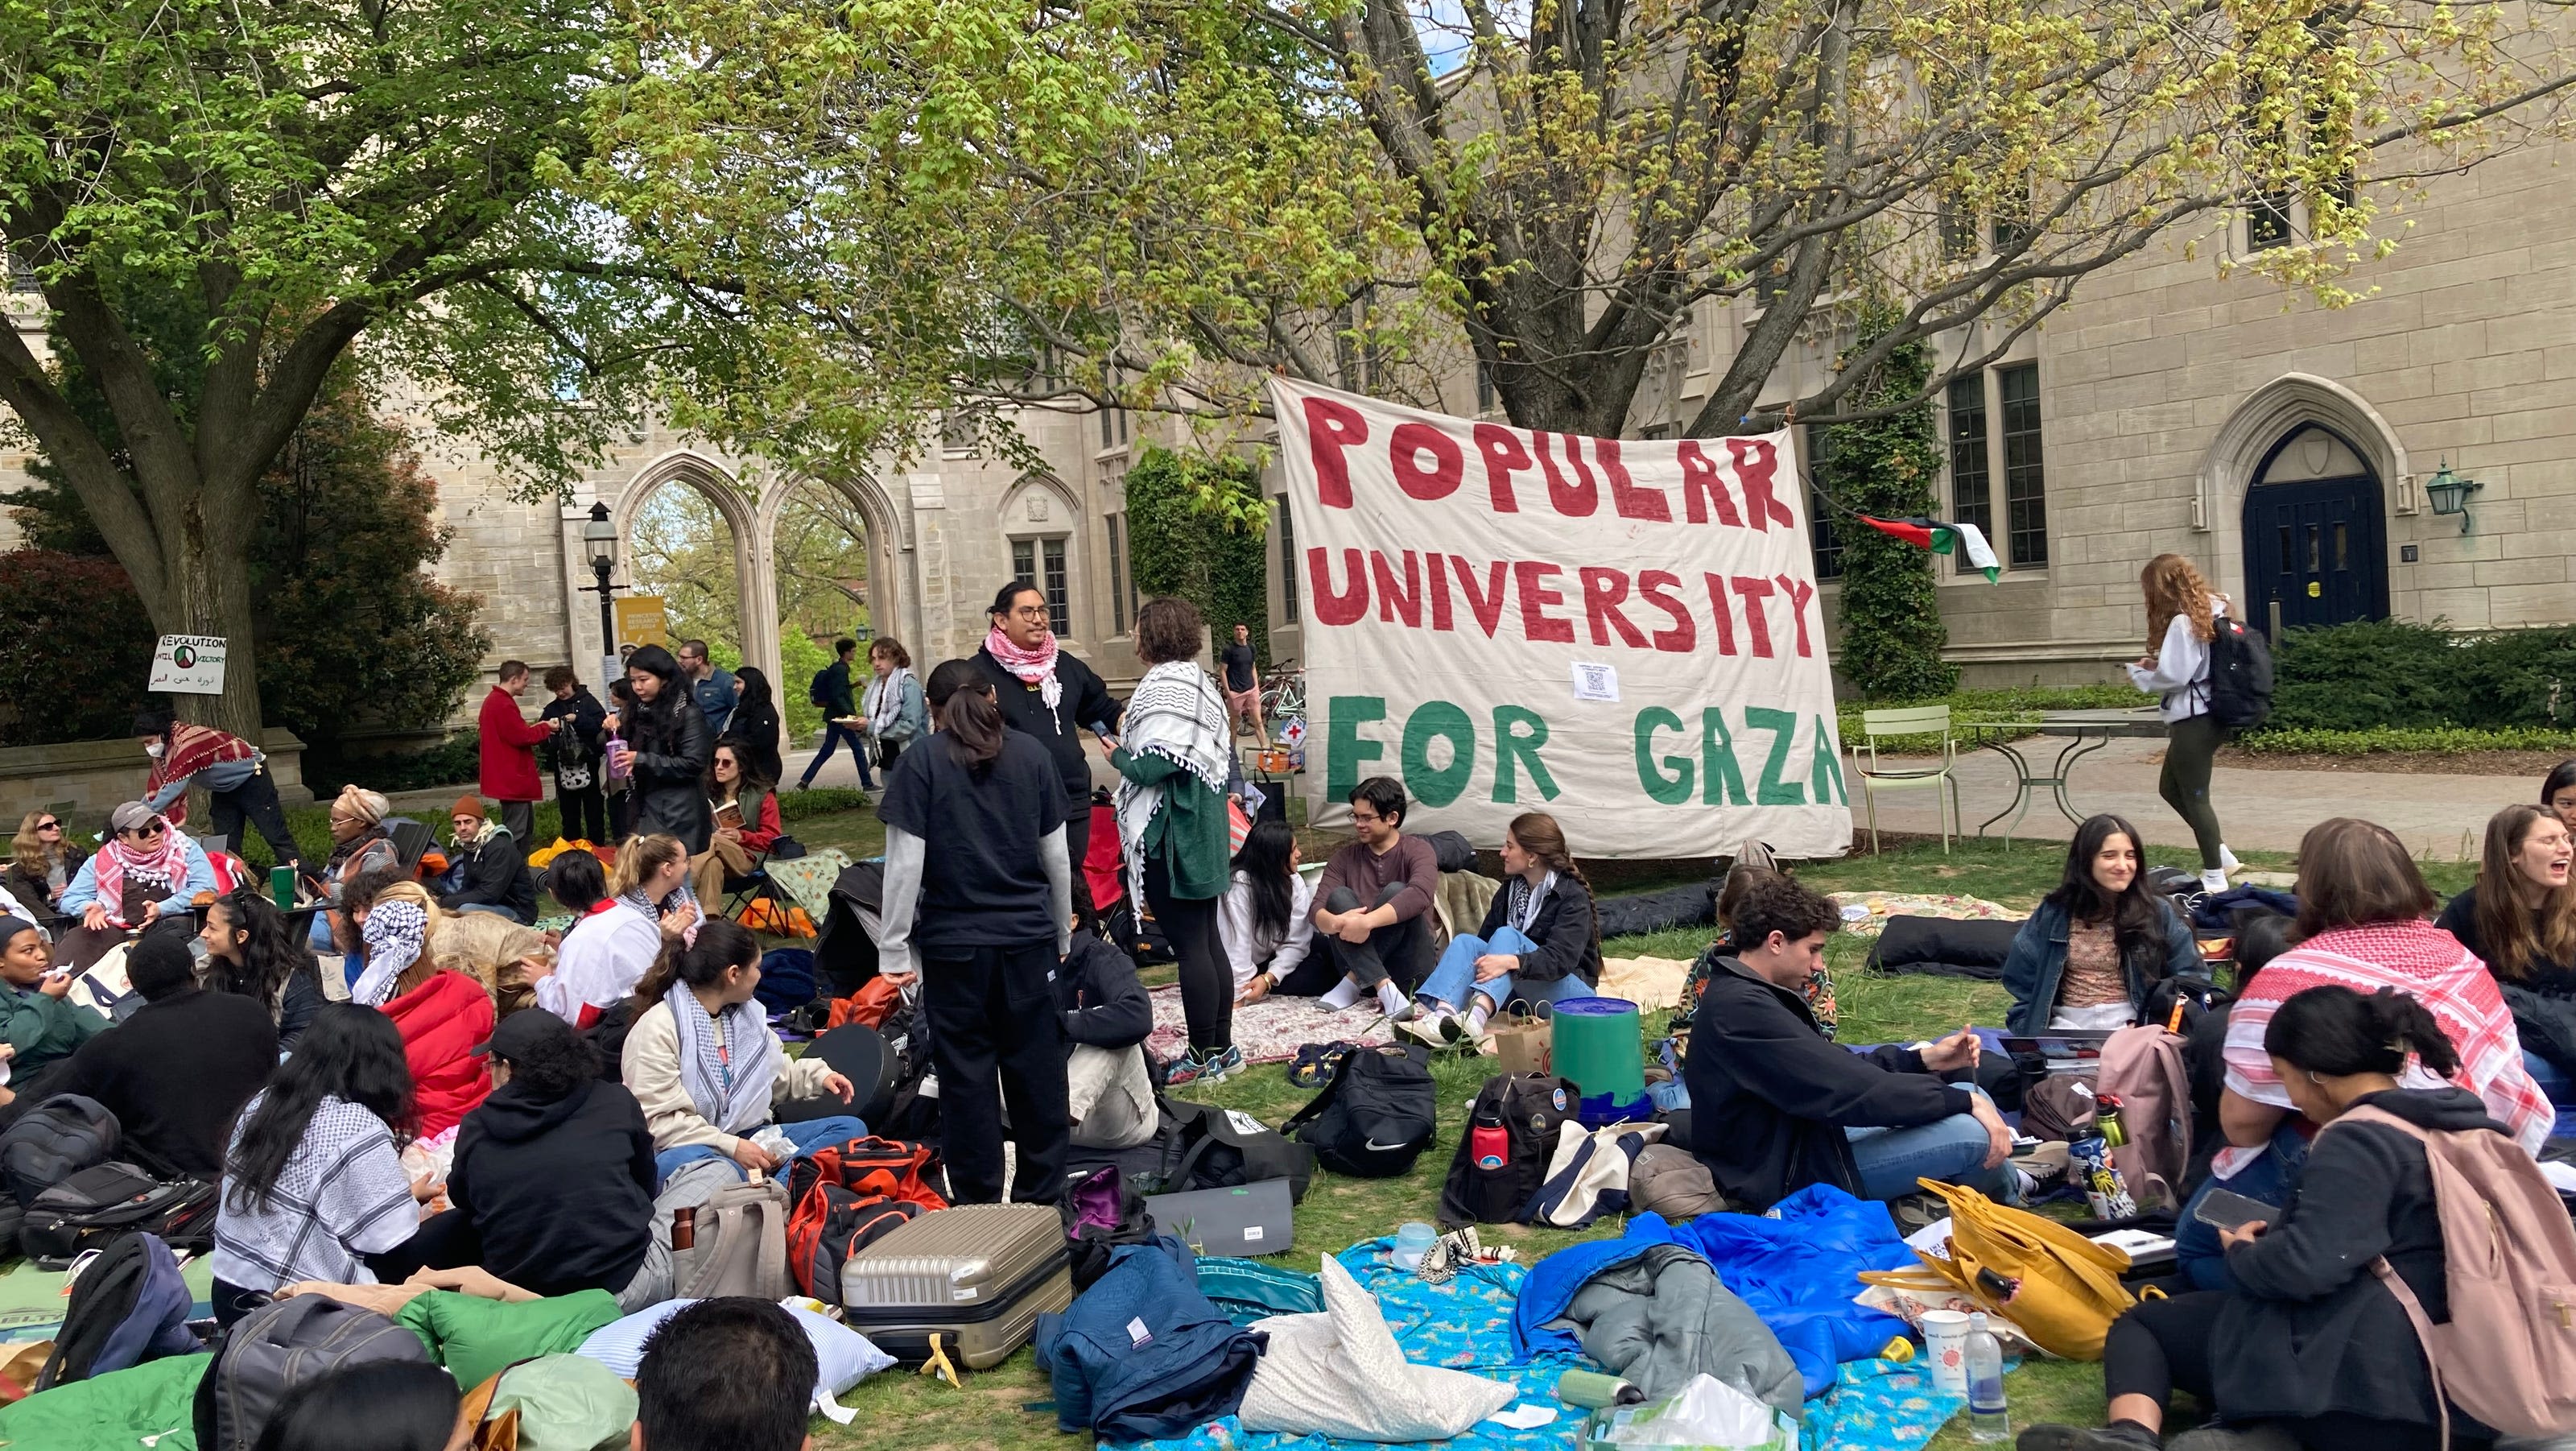 Princeton students launch hunger strike for Gaza as tensions brew on campus